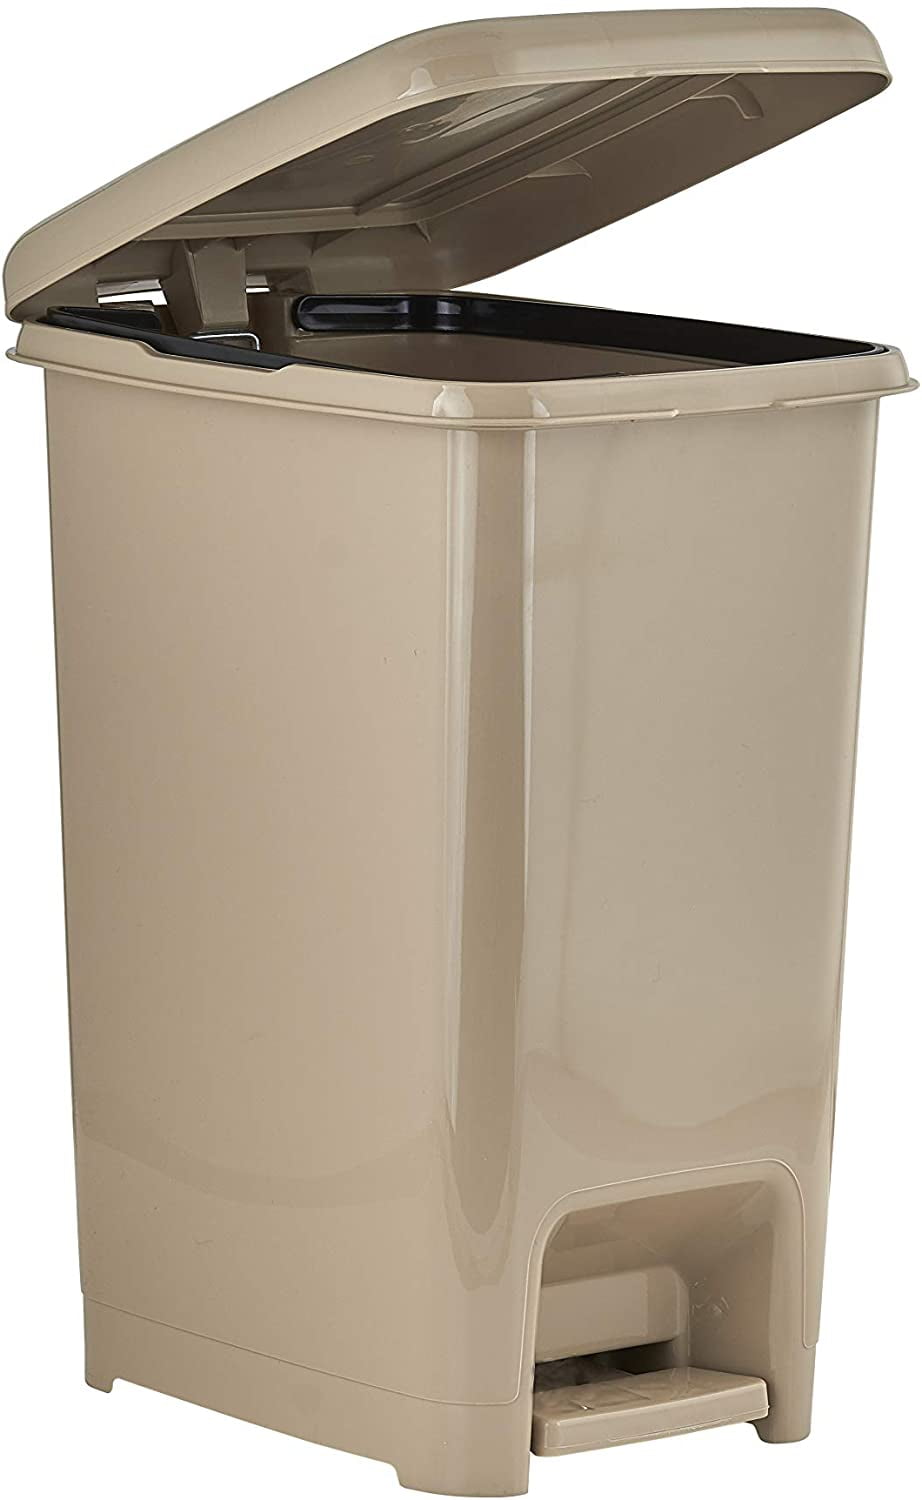 Details about   Slim 2.5-gallon Step on Space Savor Trash Can with Lid Beige Color By Superio. 